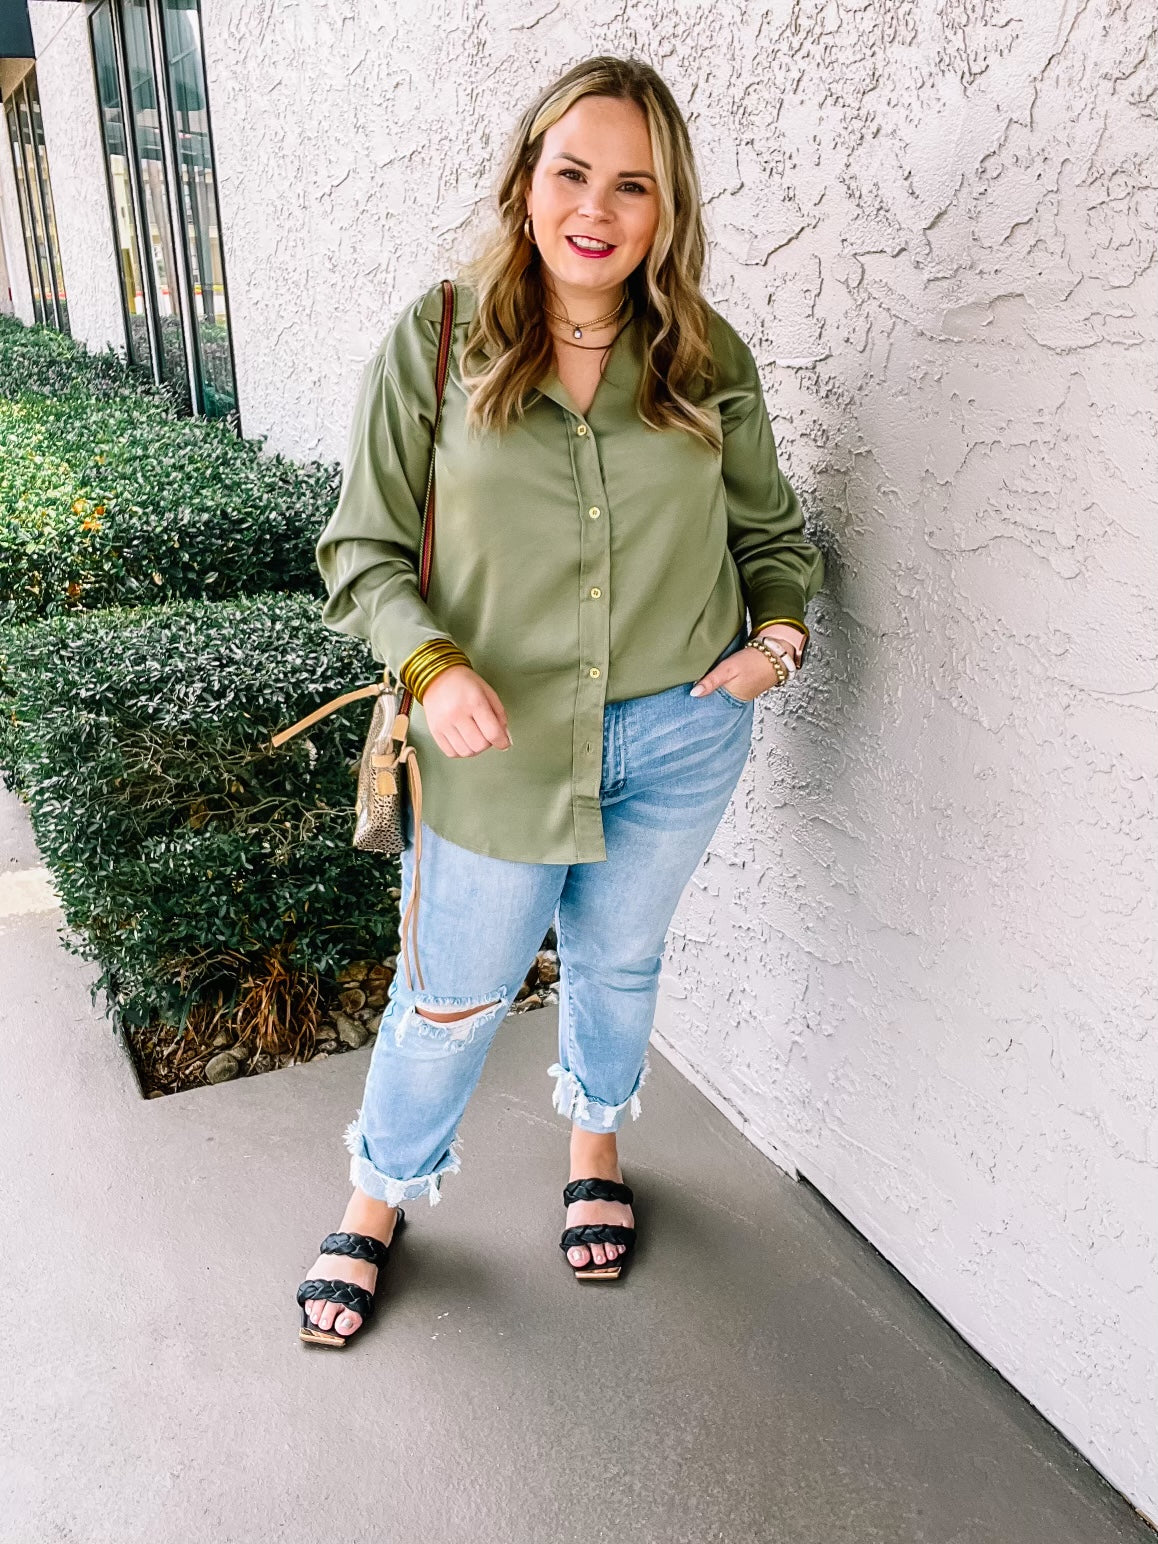 Tell Me Something Good Long Sleeve Button Up Top in Olive Green - Giddy Up Glamour Boutique